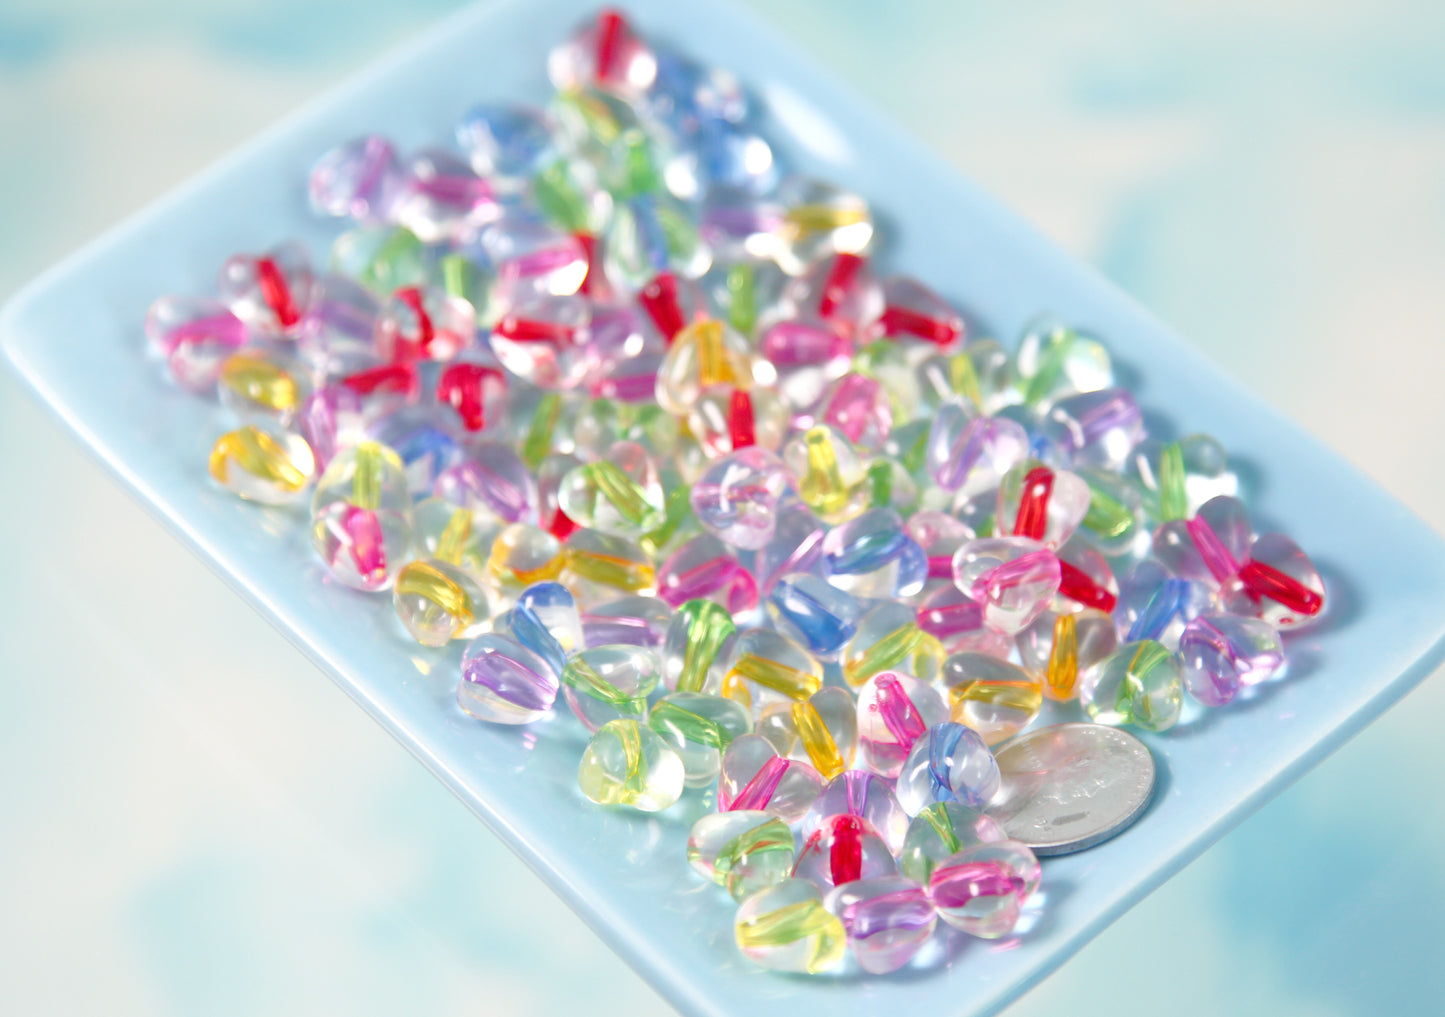 Heart Beads - 10mm Transparent with Colorful Core Heart Acrylic or Resin Beads - 100 pcs set